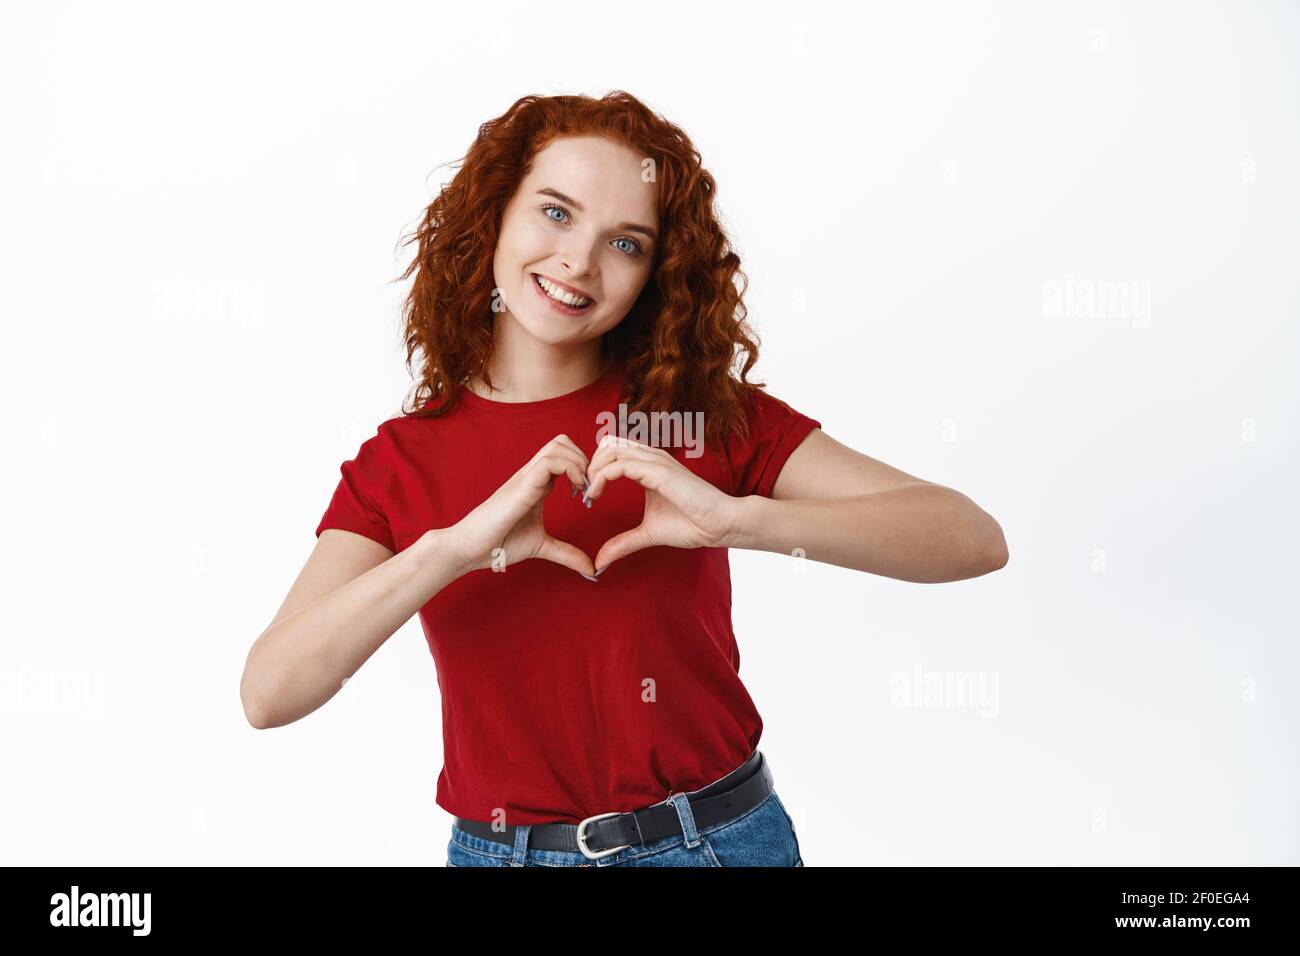 Portrait of beautiful ginger girl with curly hair and pale skin, showing heart I love you gesture near chest, express like or sympathy, standing Stock Photo